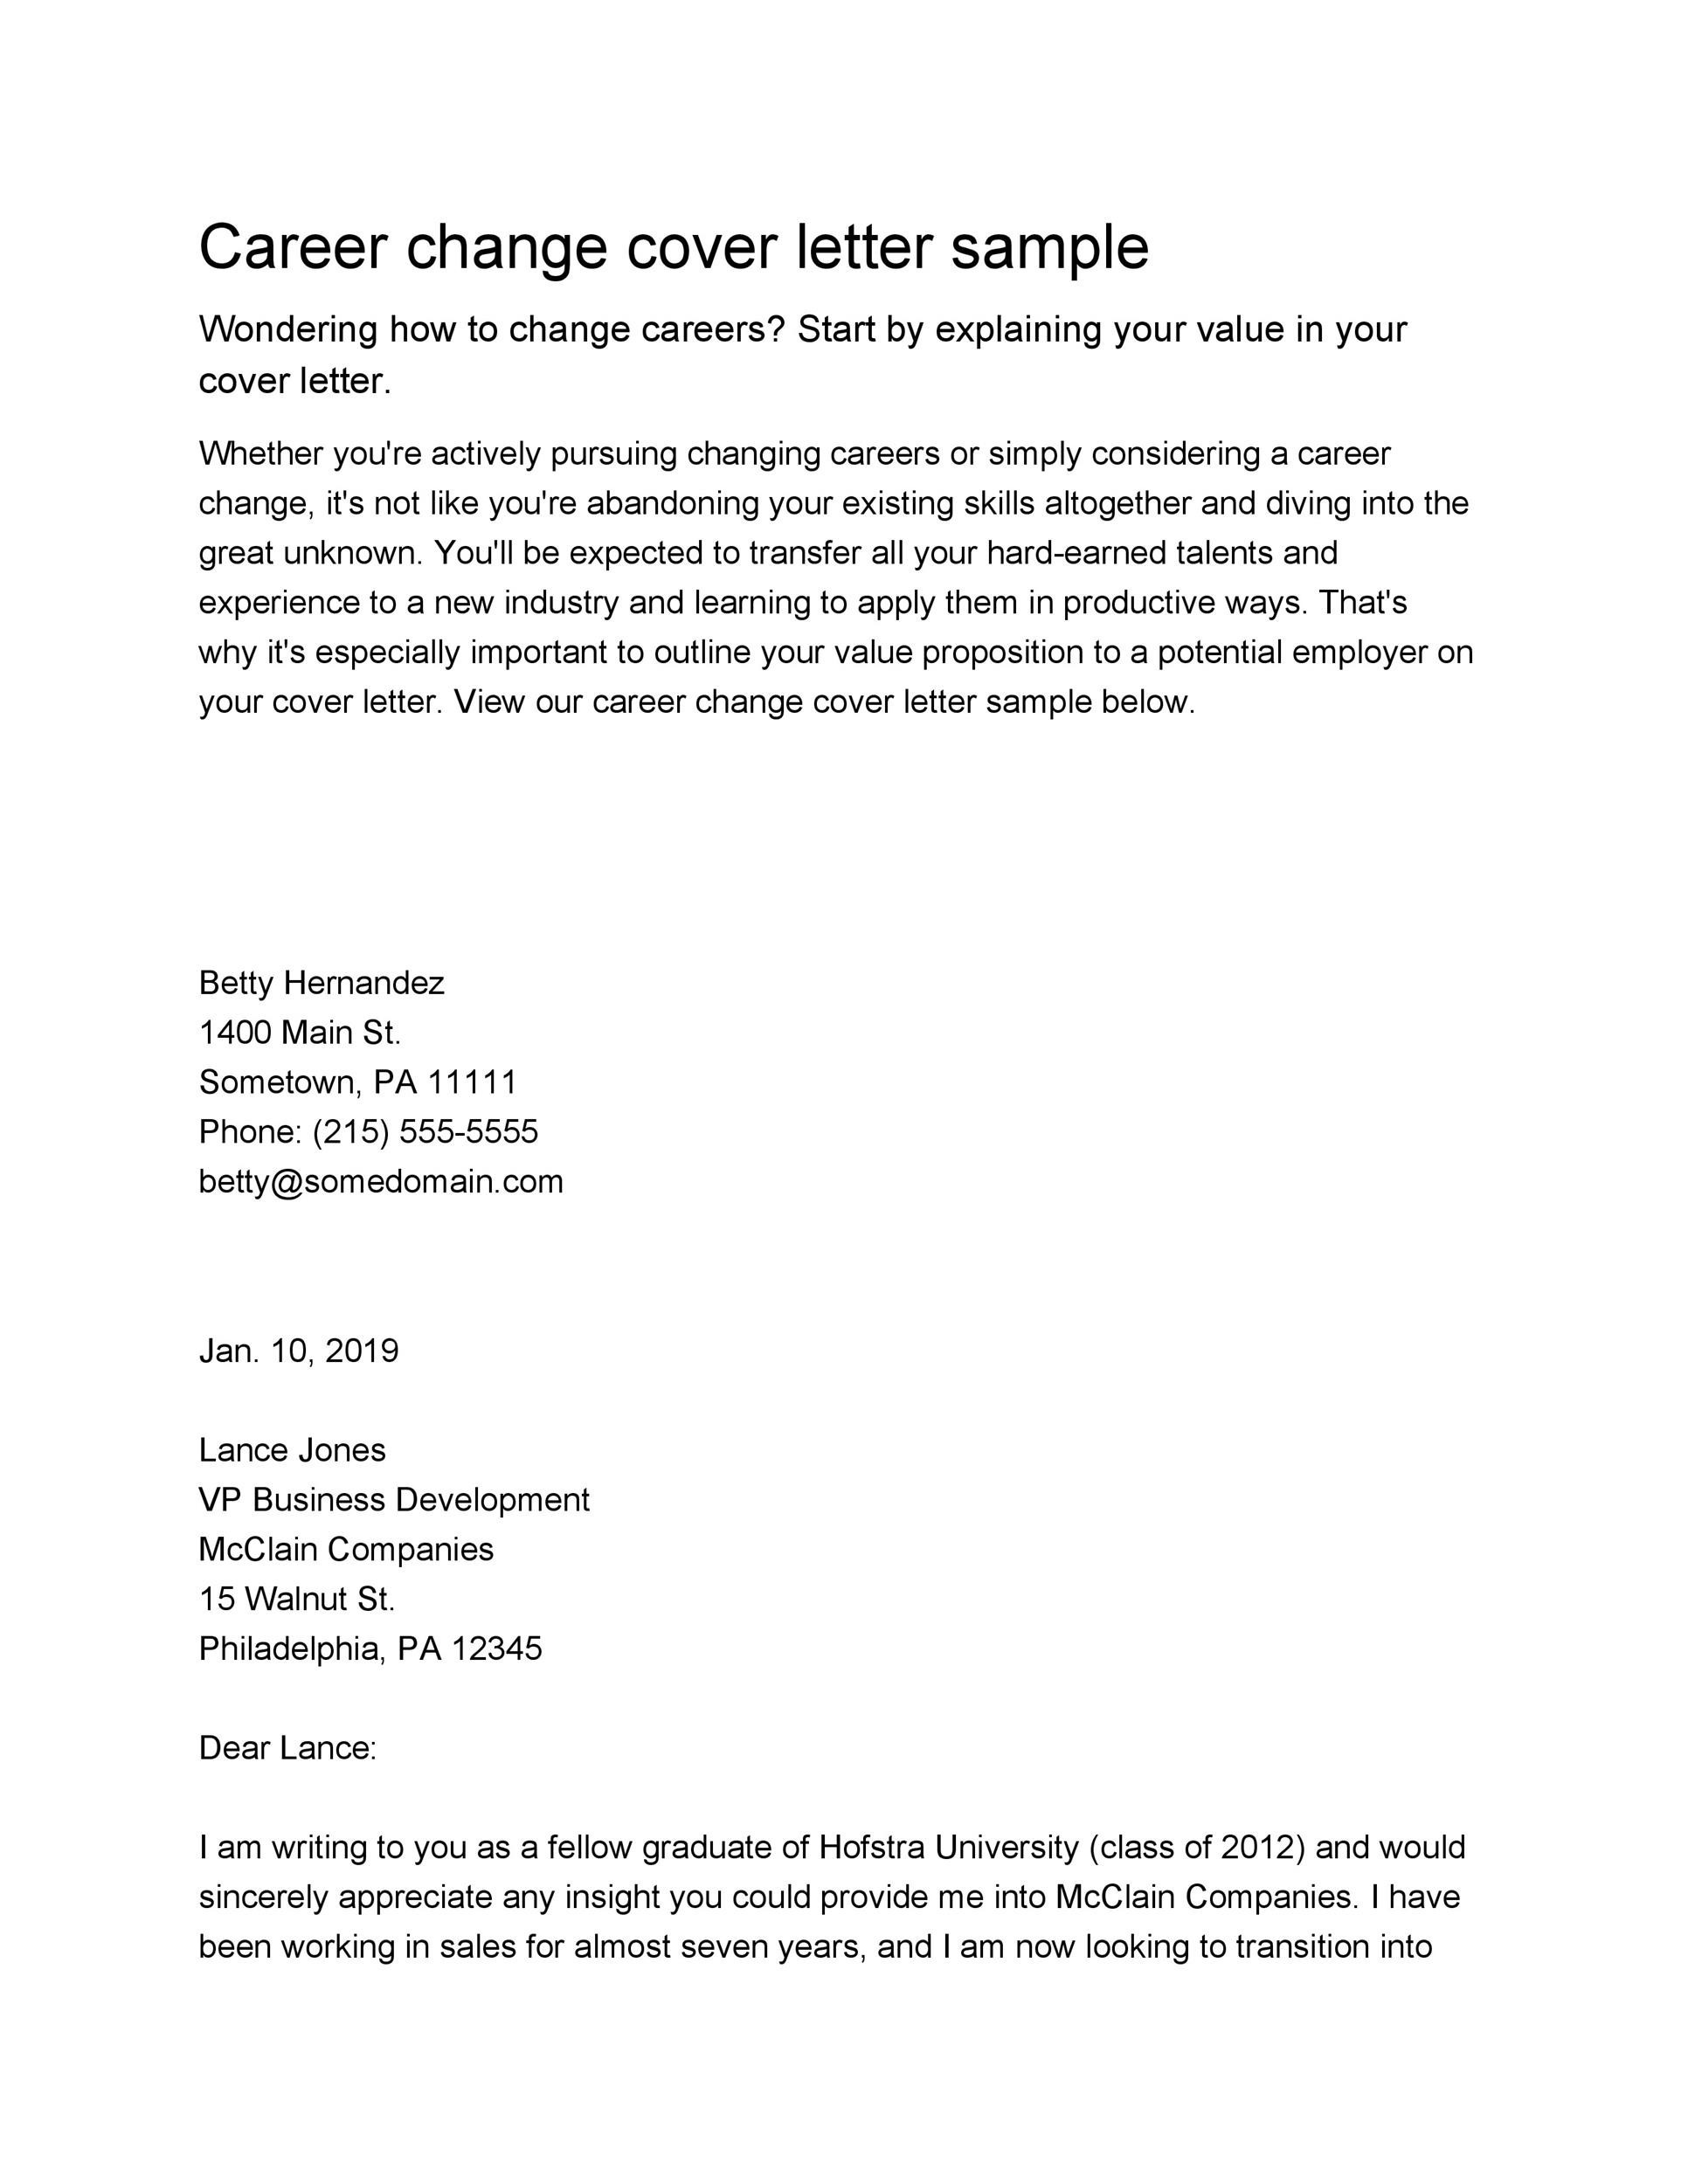 Writing A Cover Letter For A Career Change from templatelab.com